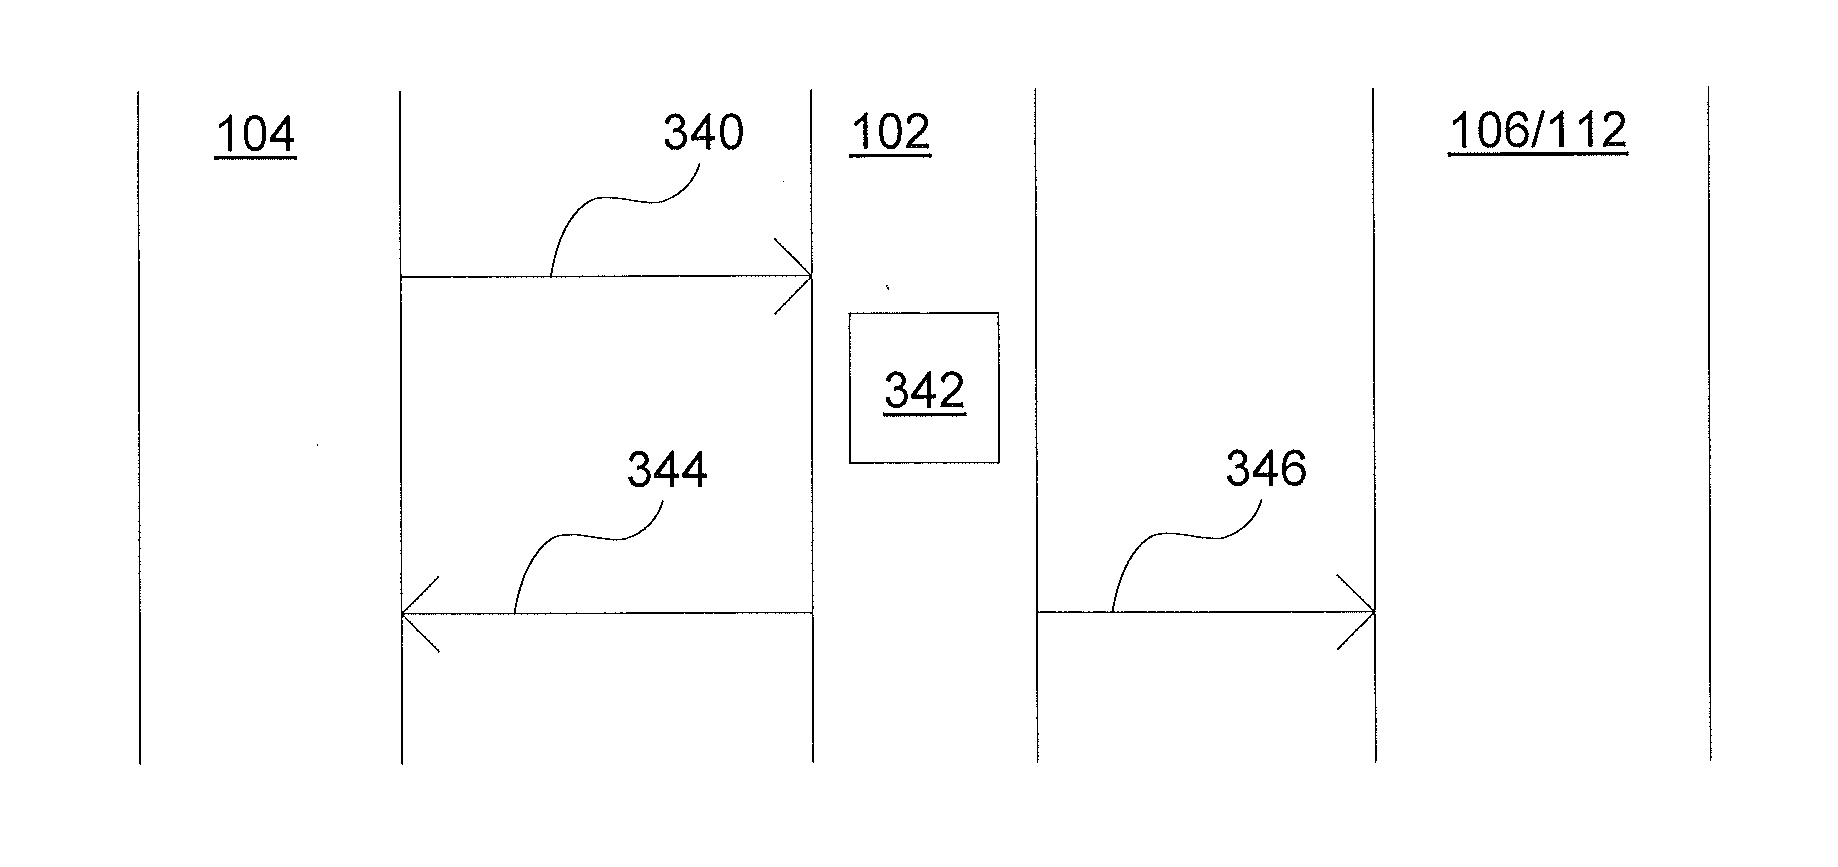 Automatic Pairing of a Vehicle and a Mobile Communications Device